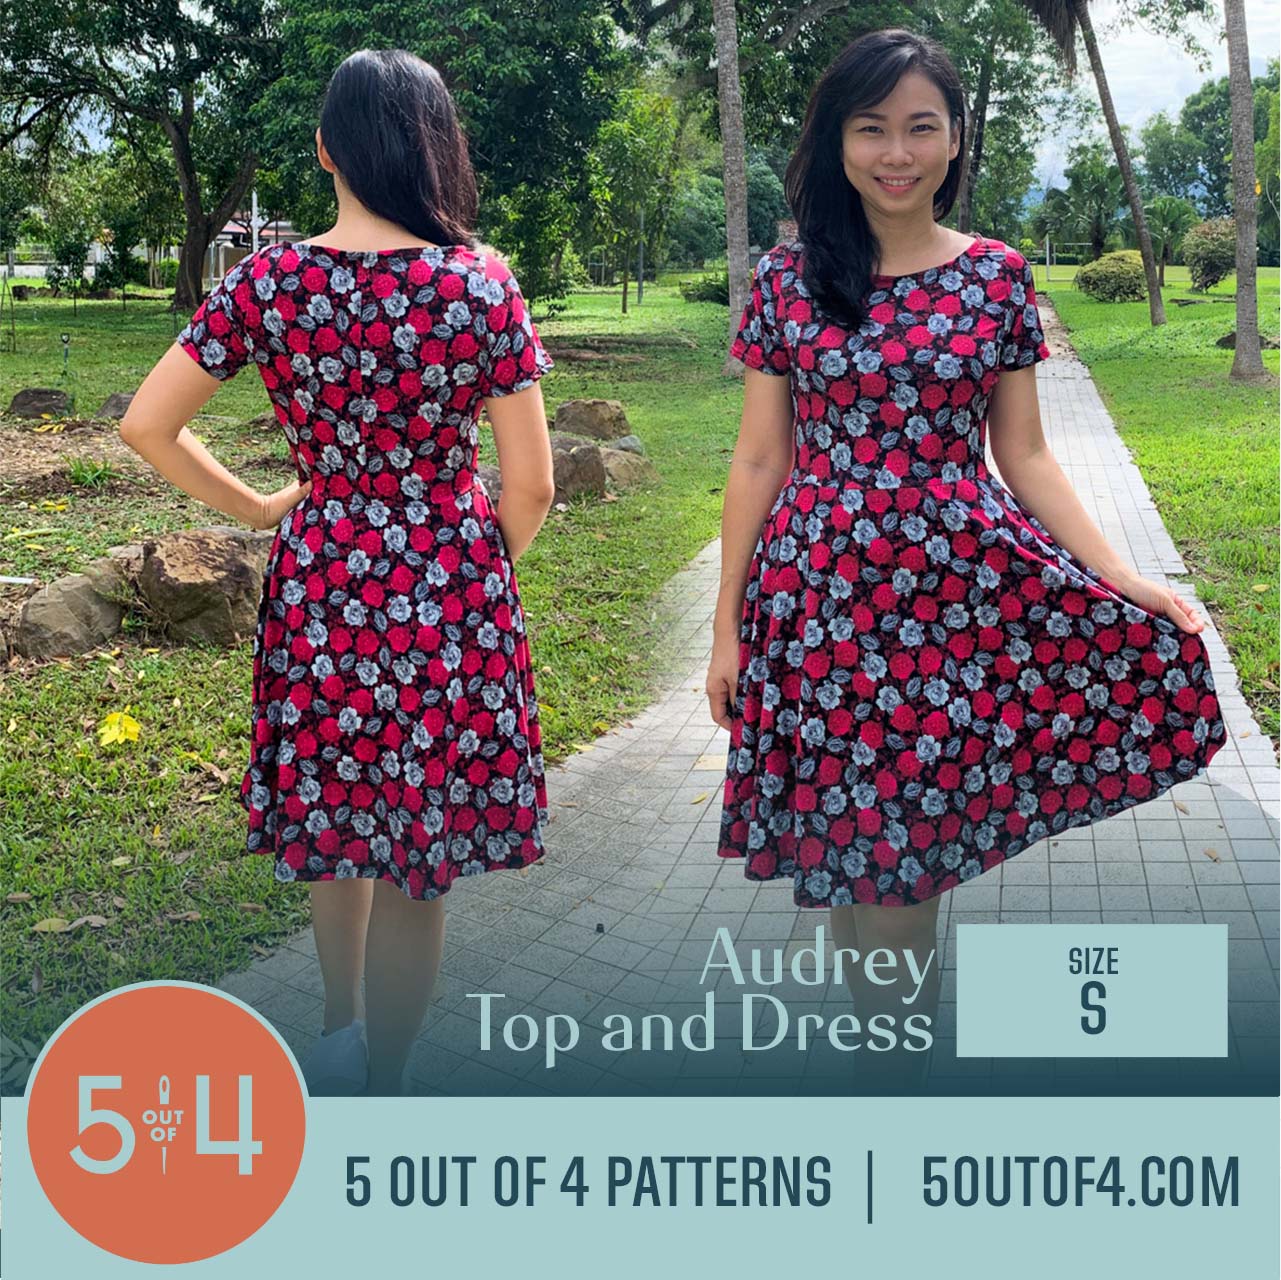 Audrey Top and Dress - 5 out of 4 Patterns